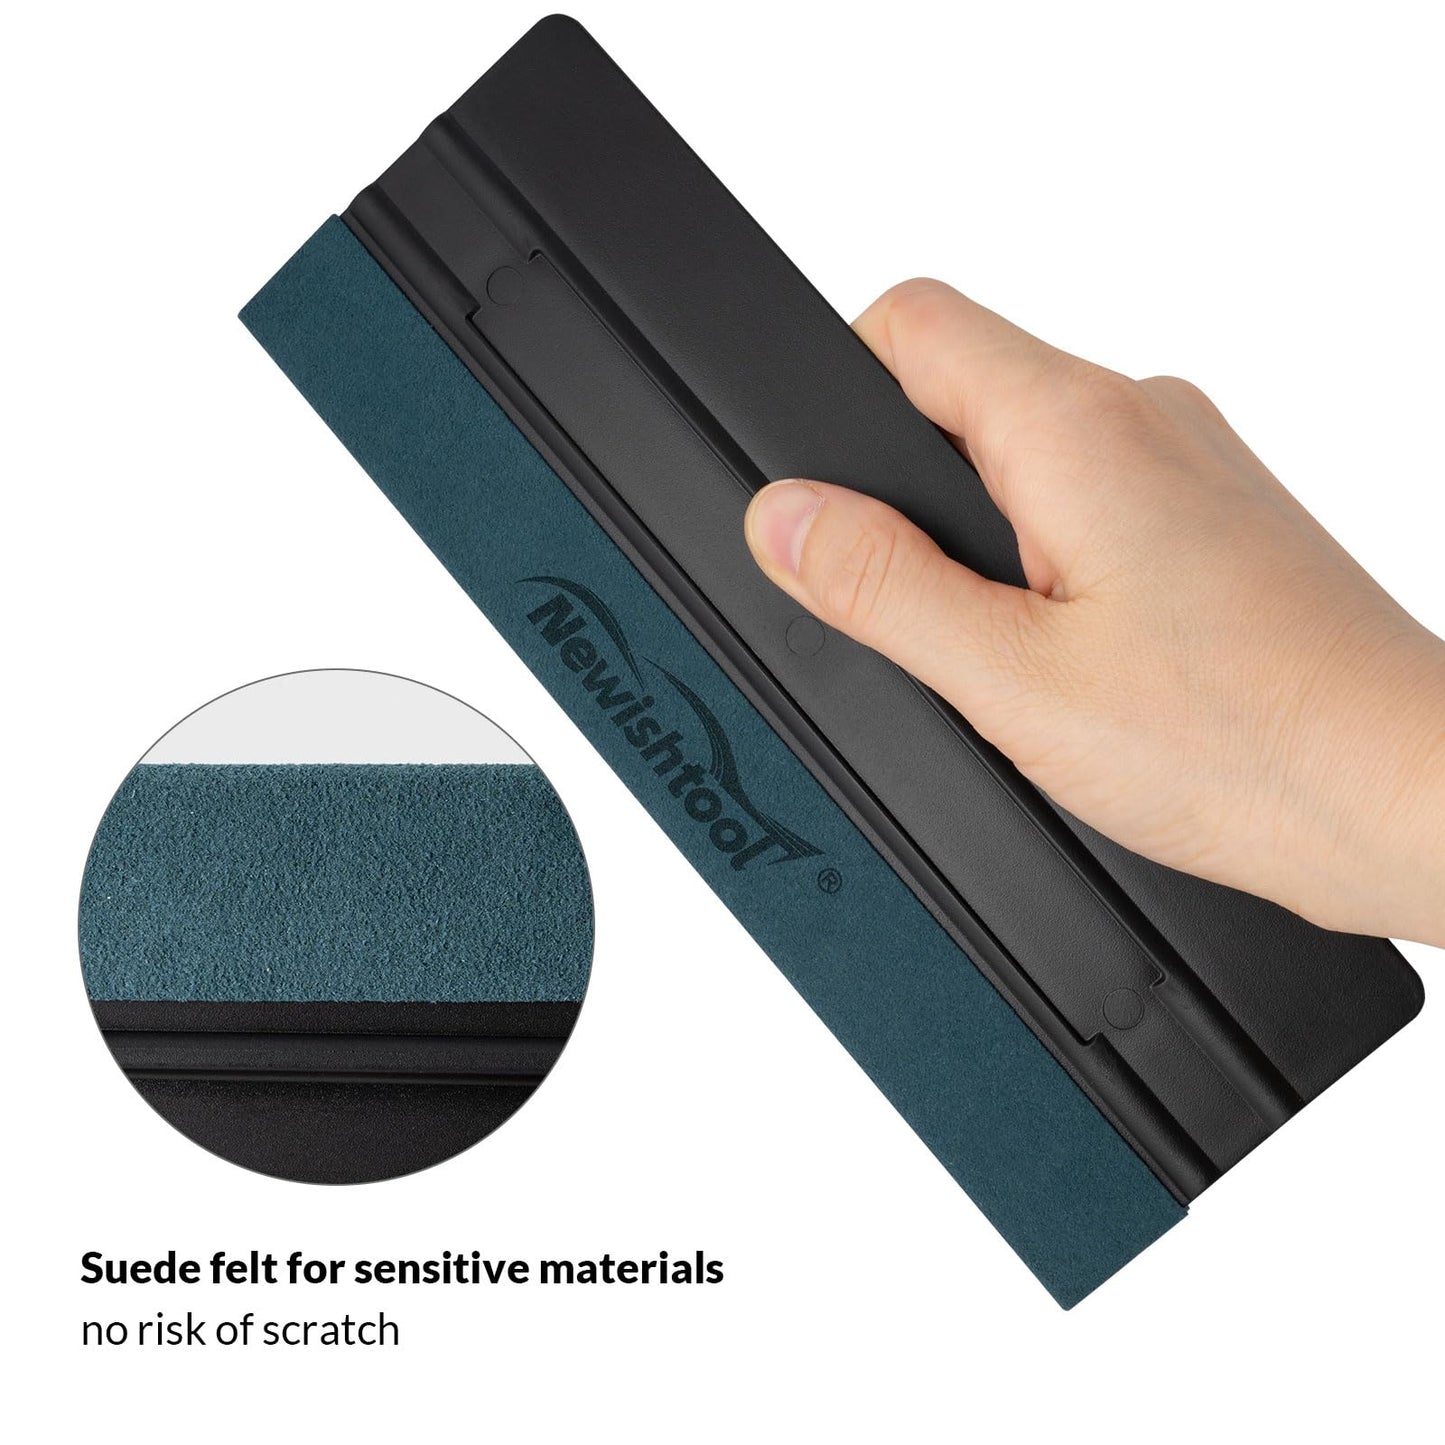 NEWISHTOOL 3 Pcs Vinyl Wrap Squeegee of Different Sizes, Felt Squeegee for Vinyl, Suede Felt Edge Squeegee Sign Making Wrap Tool for Wallpaper Smoothing, Car PPF Vinyl Wrap Window Tint Application